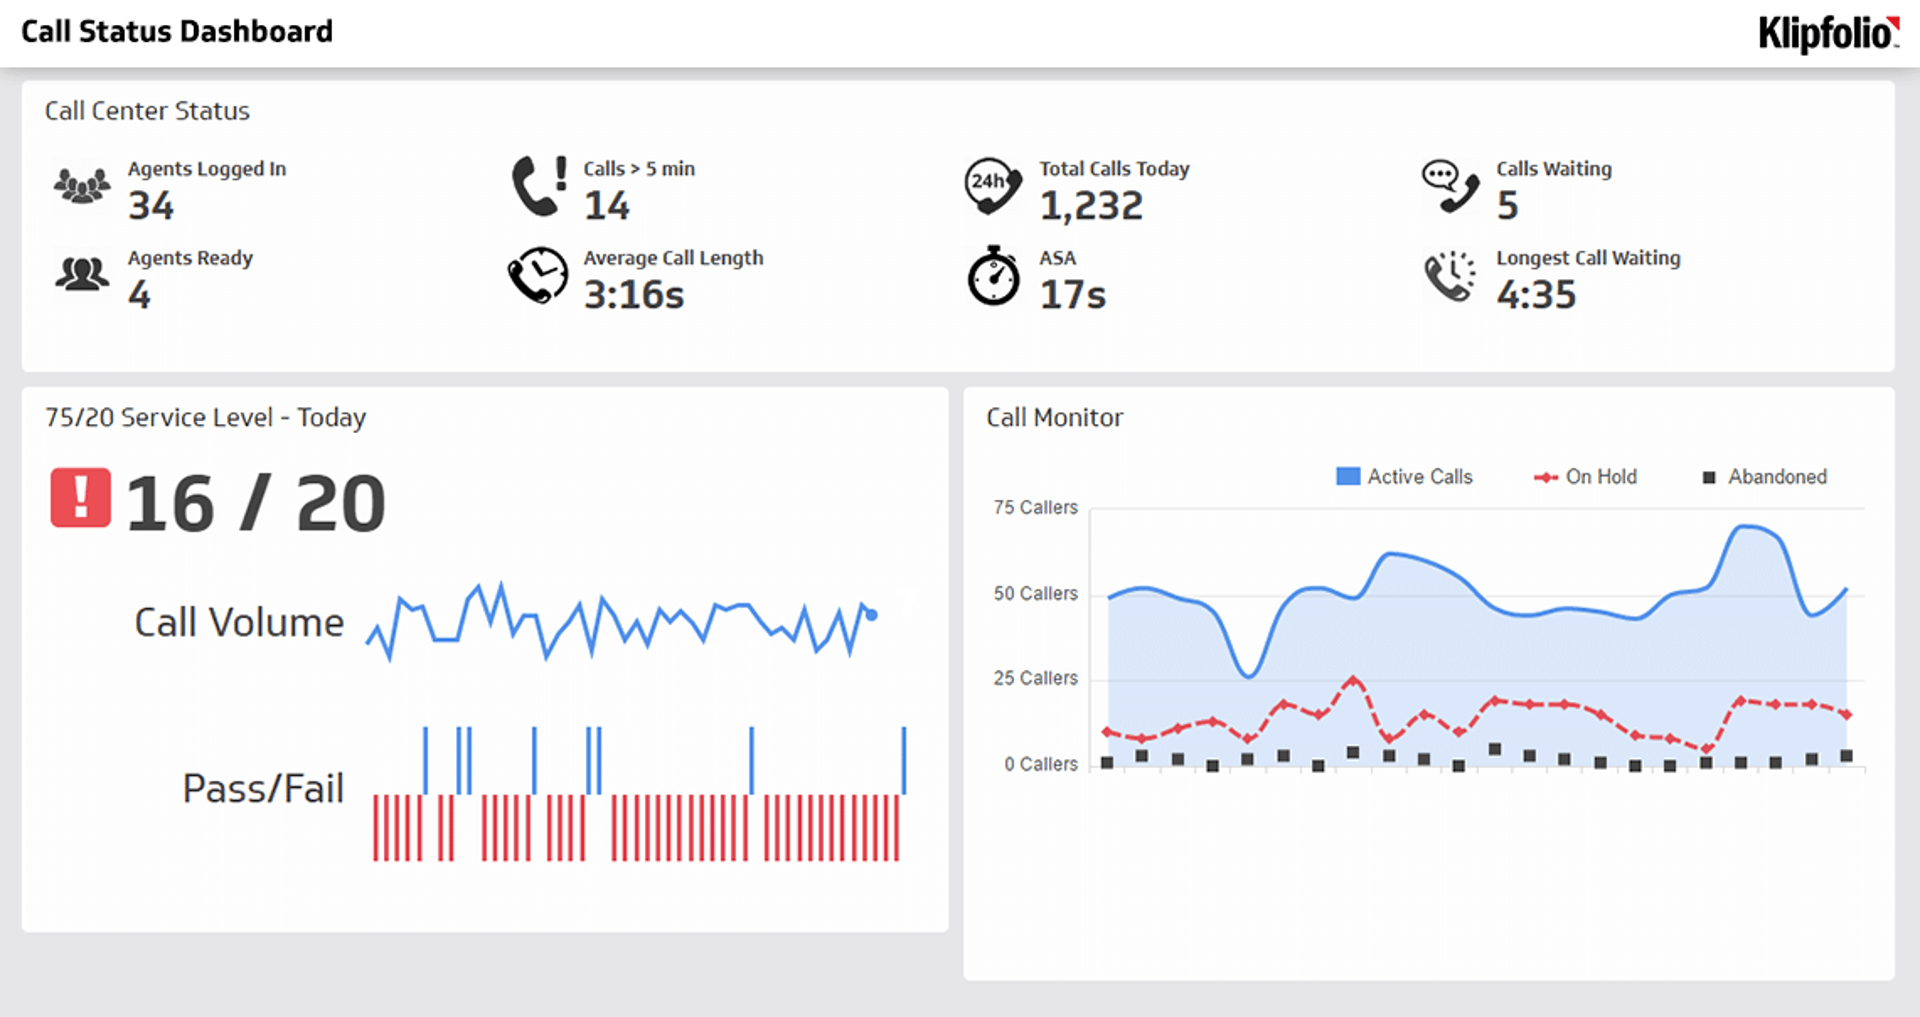 Related Dashboard Examples - Call Status Dashboard